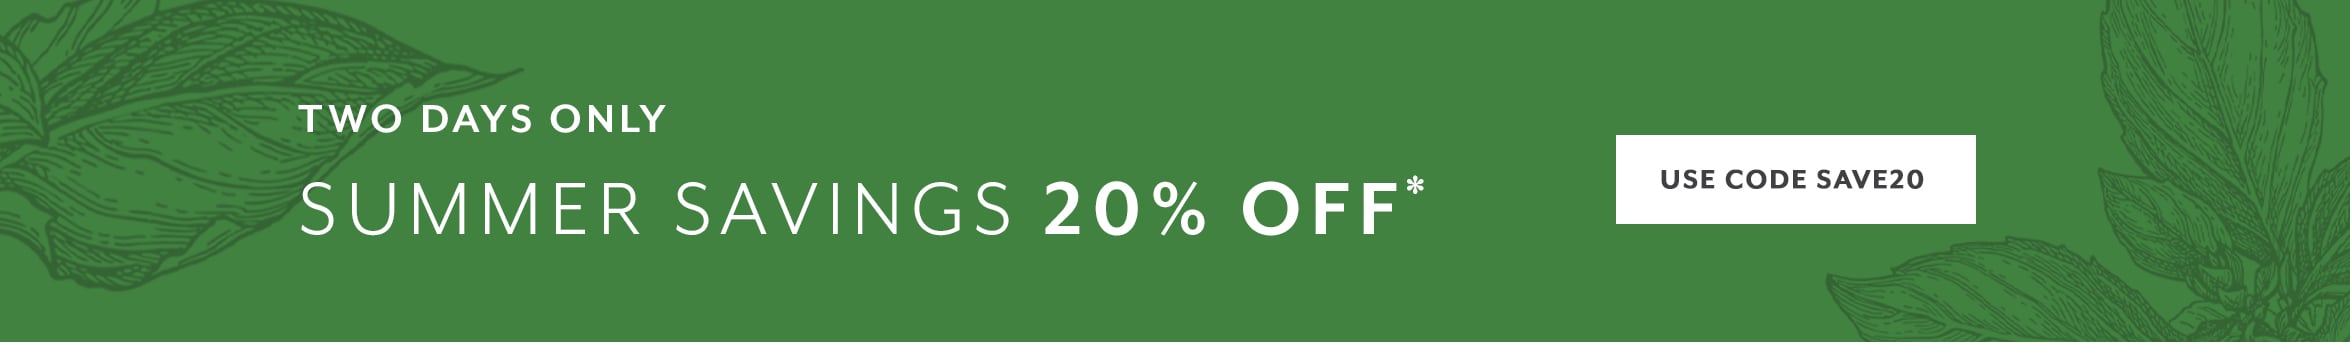 Two Days Only Summer Savings 20% off, use code SAVE20. Shop now.